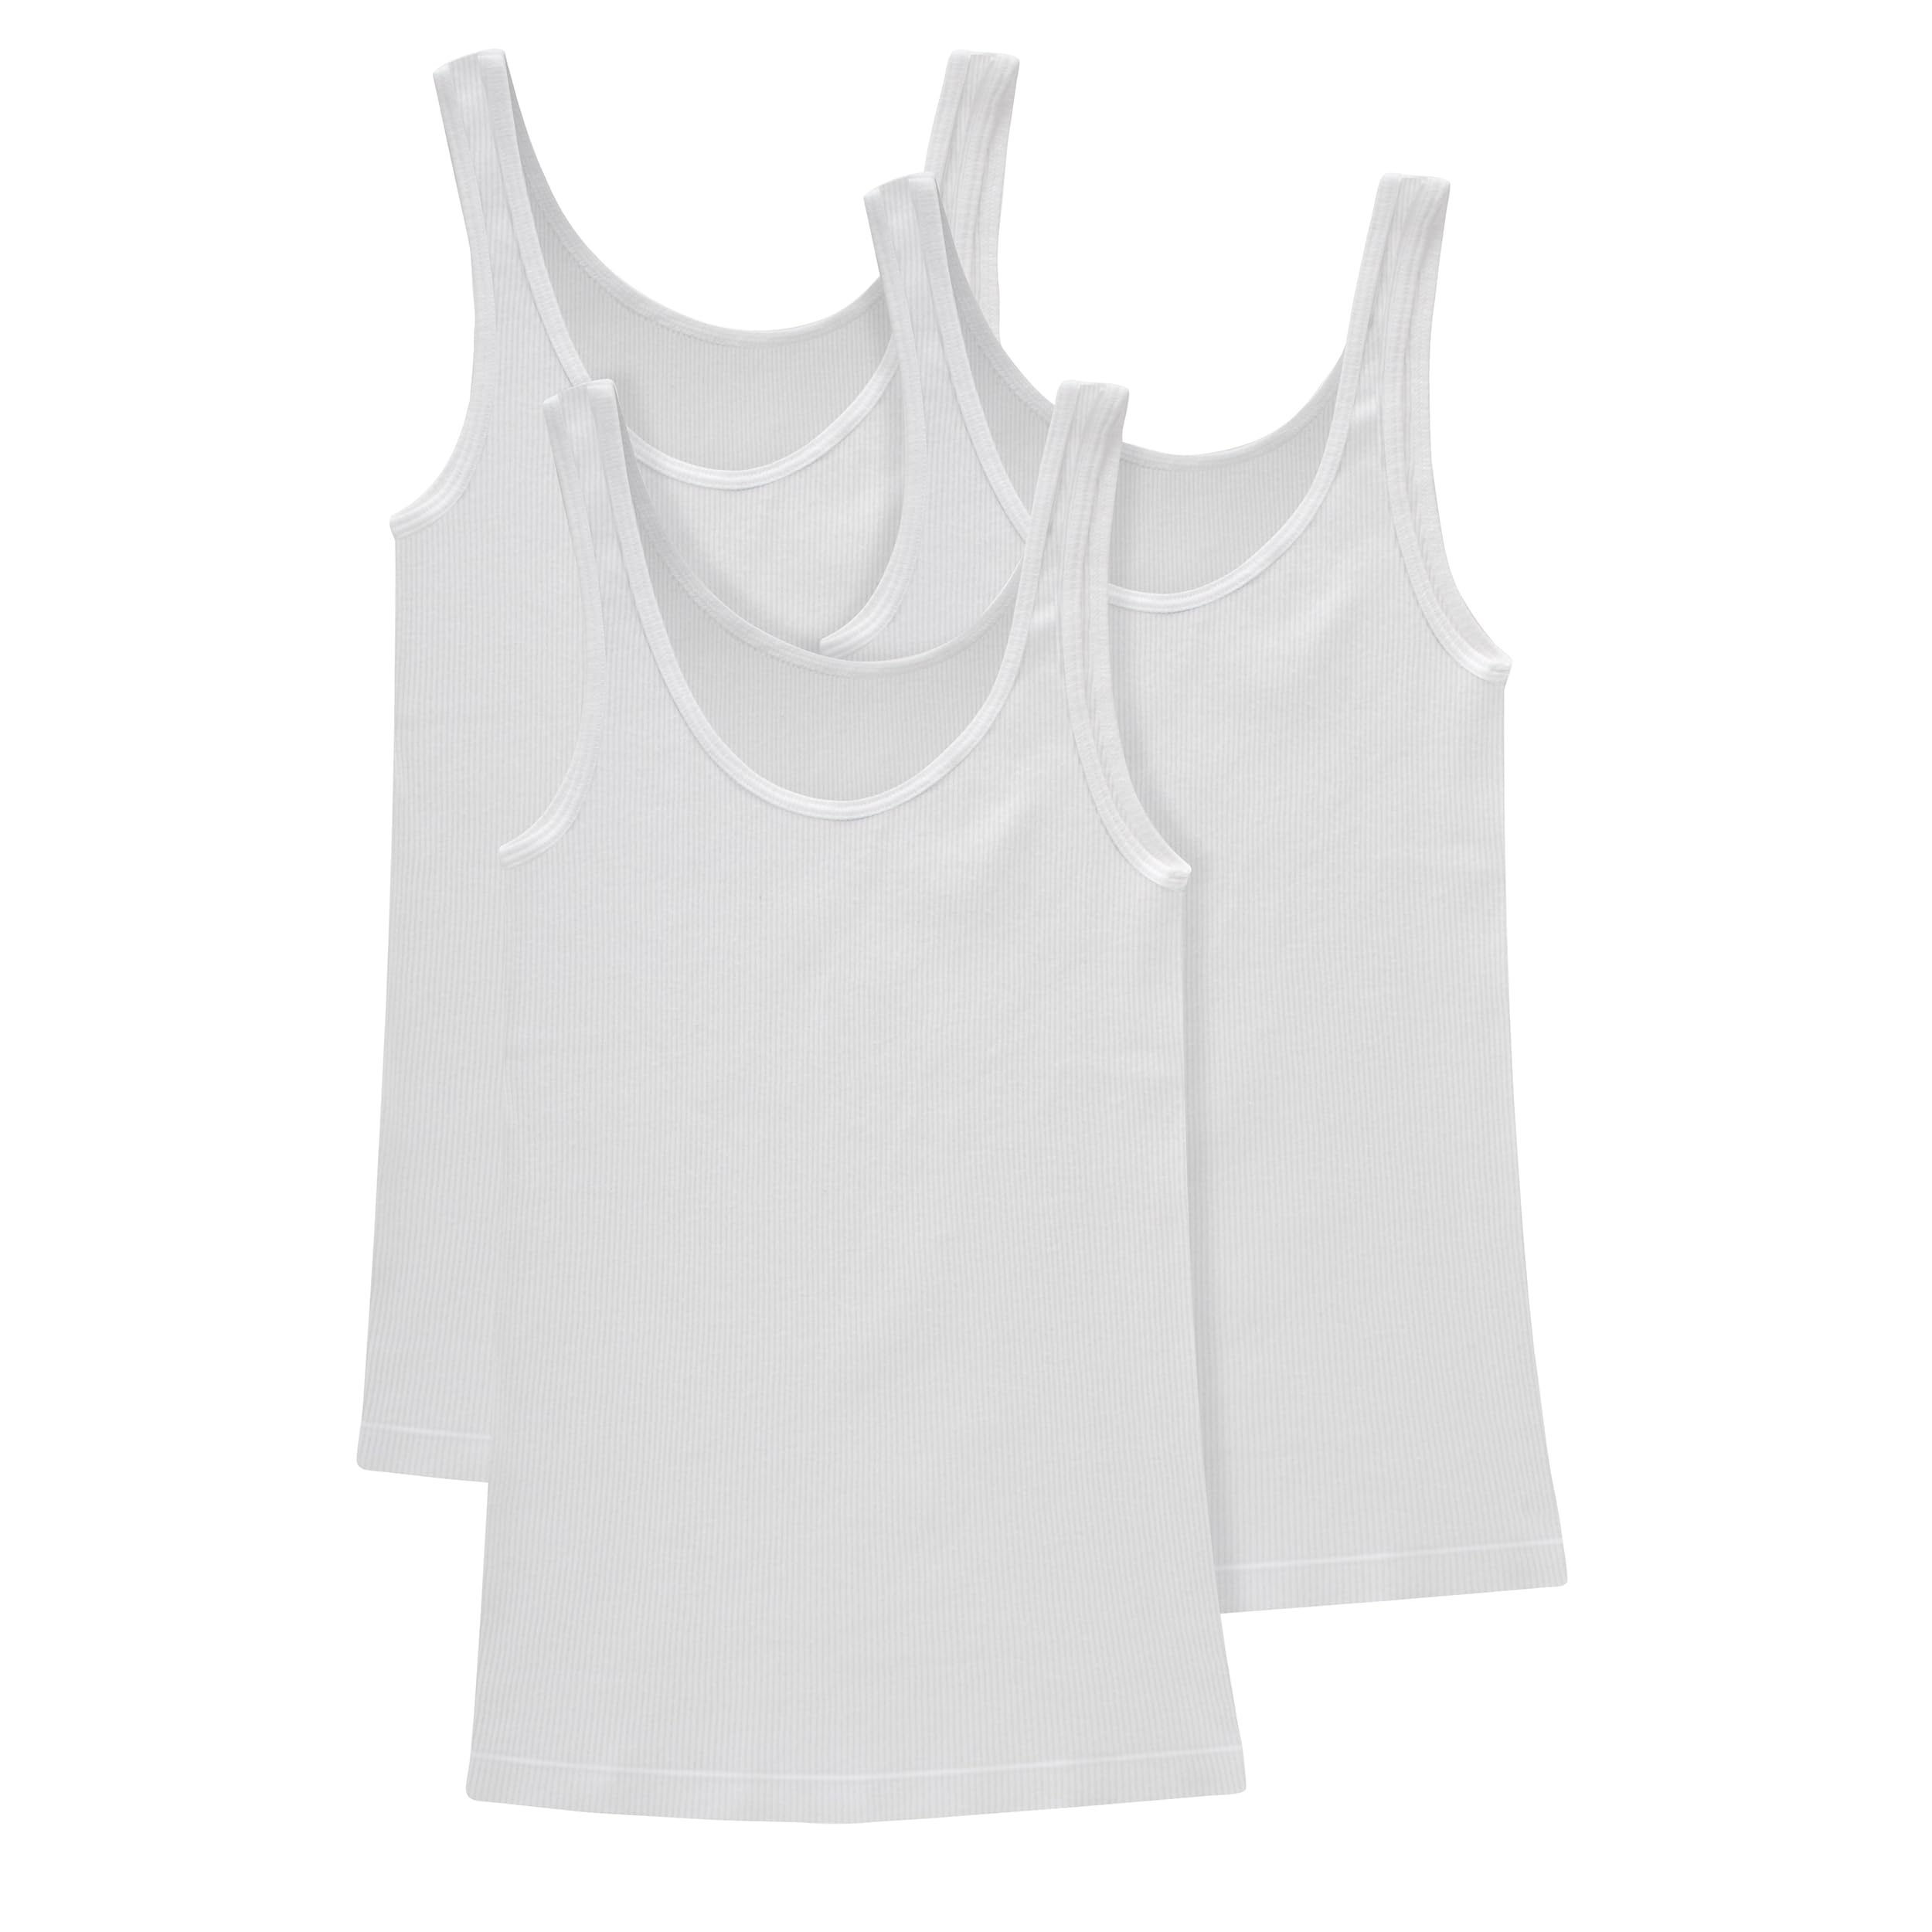 Hanes Women's Originals Knit Cotton Pack, Soft Ribbed Tank Tops, 3-Pack